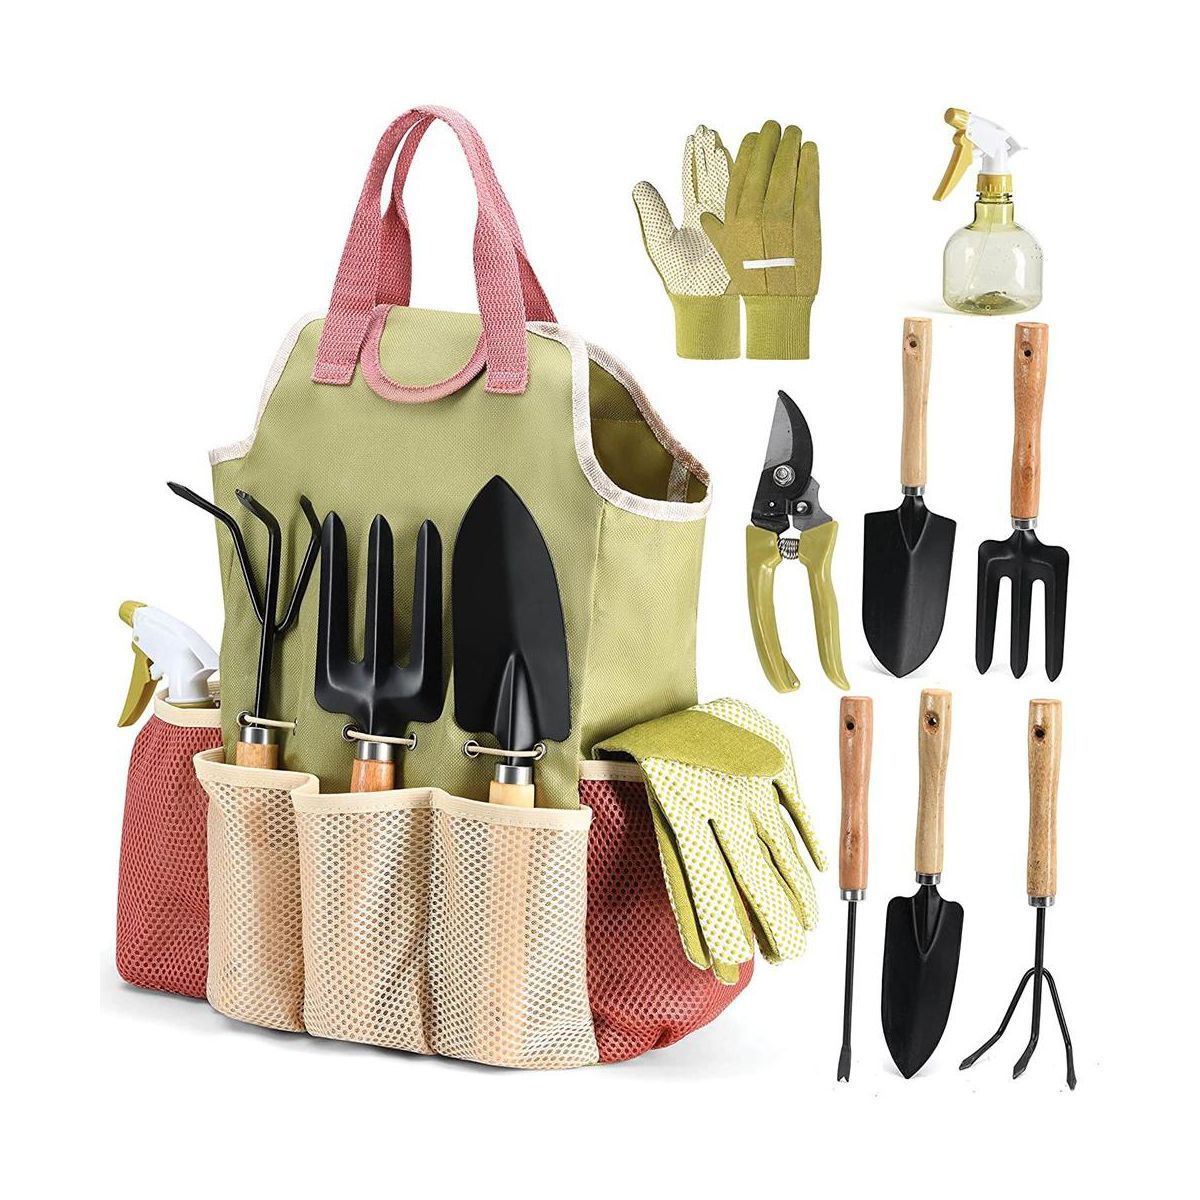 Gardening Tools Set of 10 Pieces - Complete Garden Tool Kit Comes with Bag, Gloves, Garden Tool S... | Target